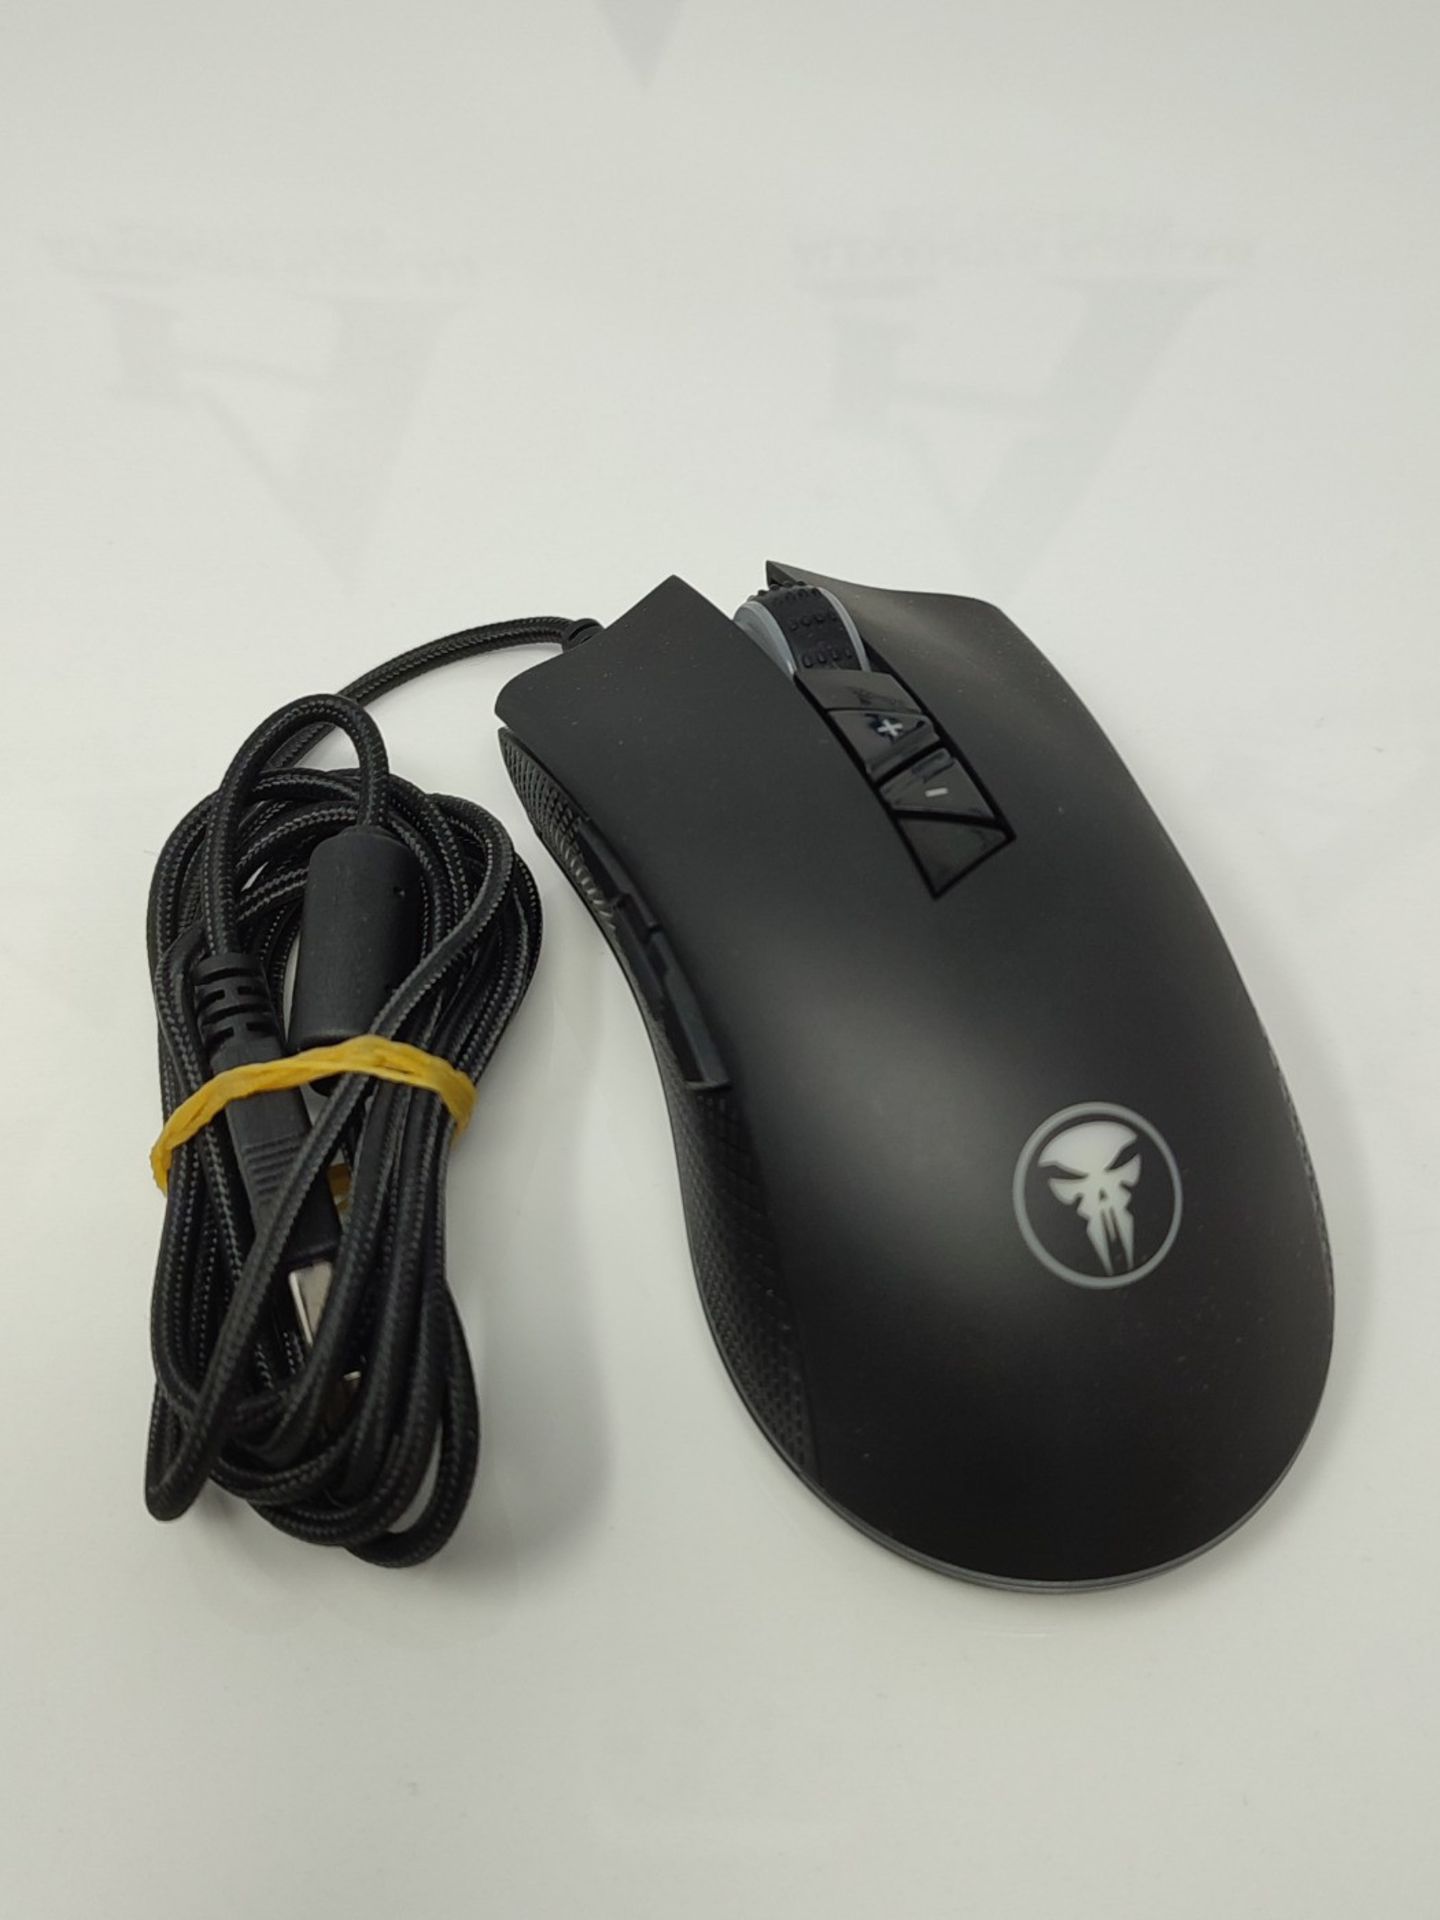 RRP £60.00 YPJKHL M88 Gaming Mouse, 4 Rows Adjustable 2000 DPI High Precision 8 Programmable Keys - Image 3 of 3